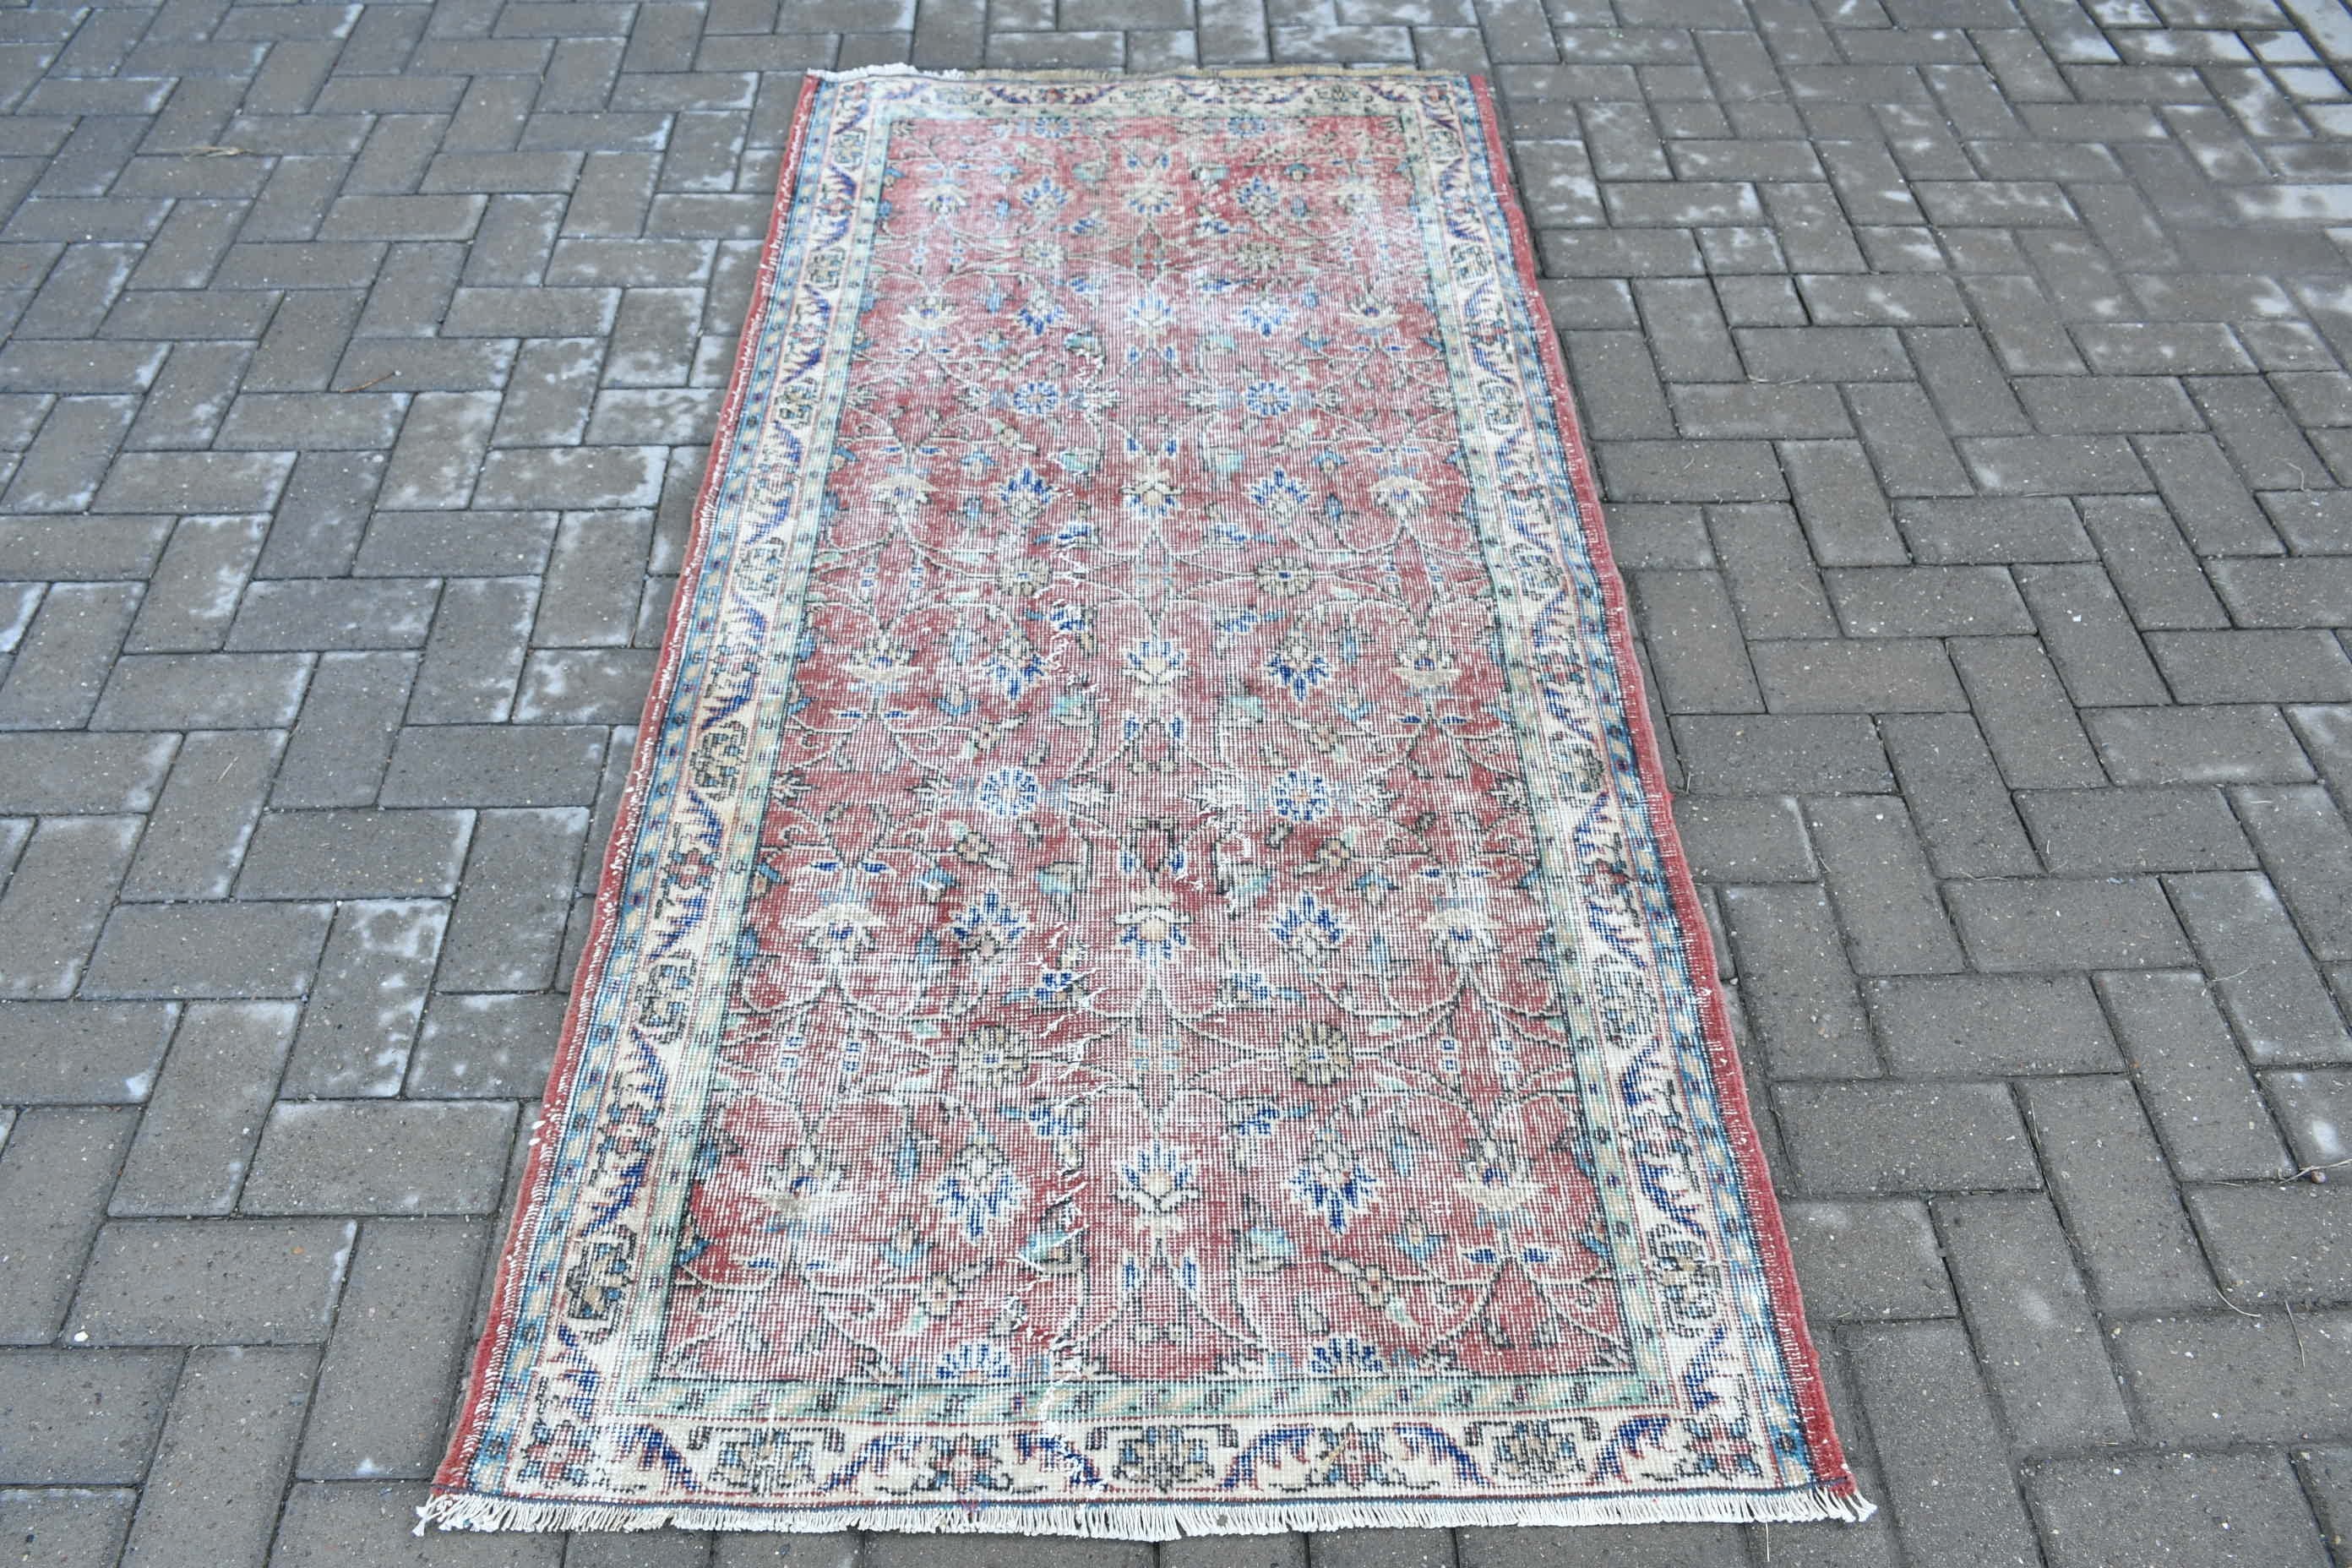 Rugs for Kitchen, Kitchen Rug, Red Oushak Rug, Bedroom Rug, Vintage Rugs, Turkish Rug, Cute Rug, 3.2x6.3 ft Accent Rugs